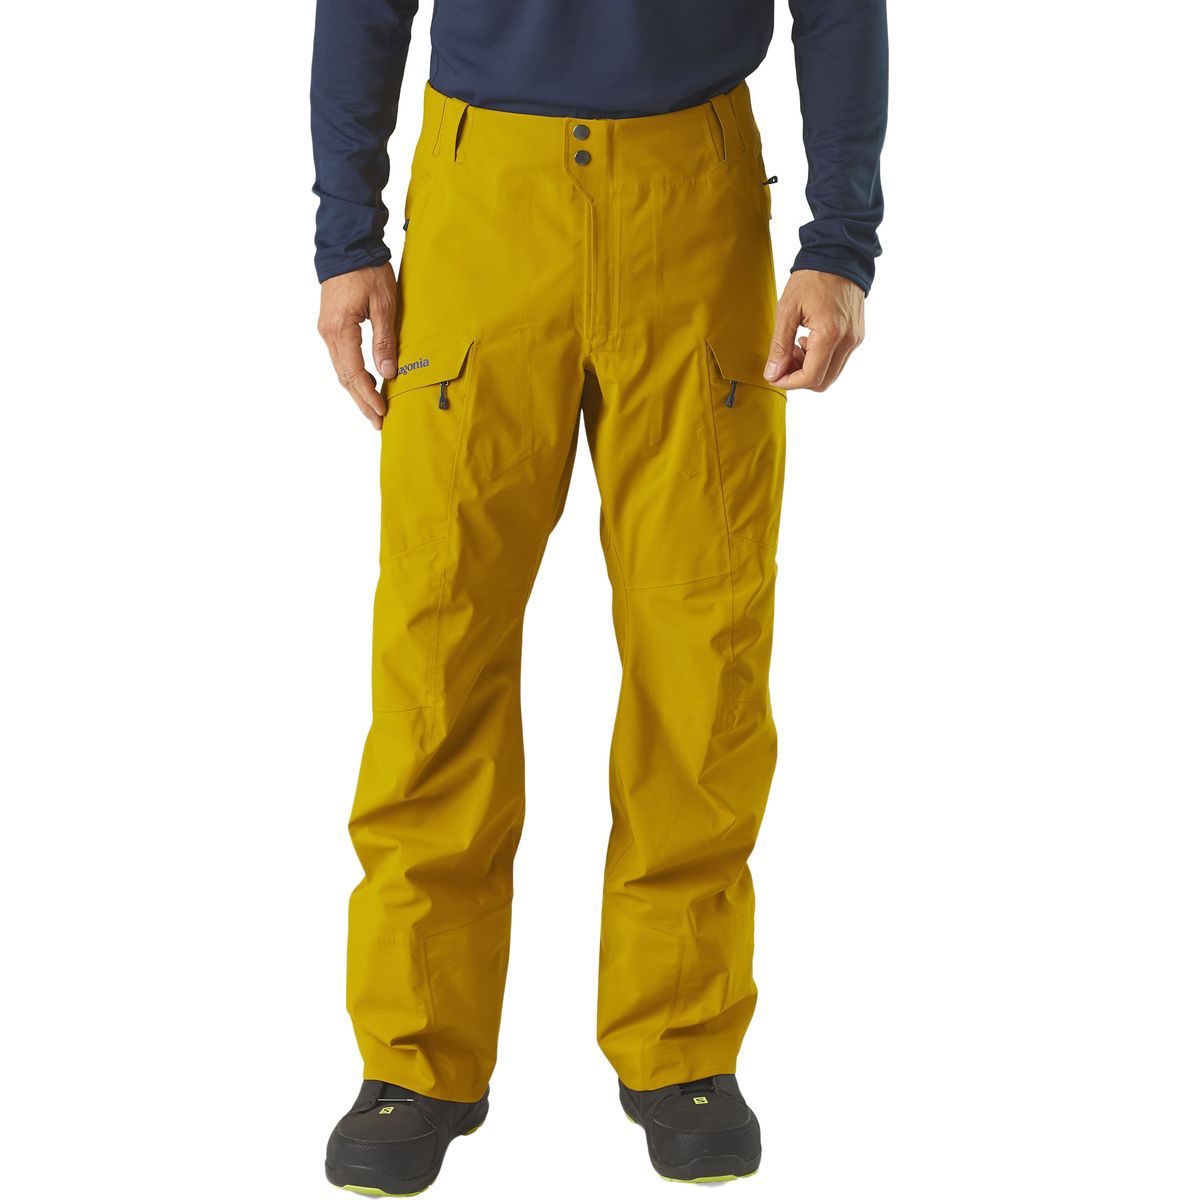 Patagonia Untracked - Men's - Clothing